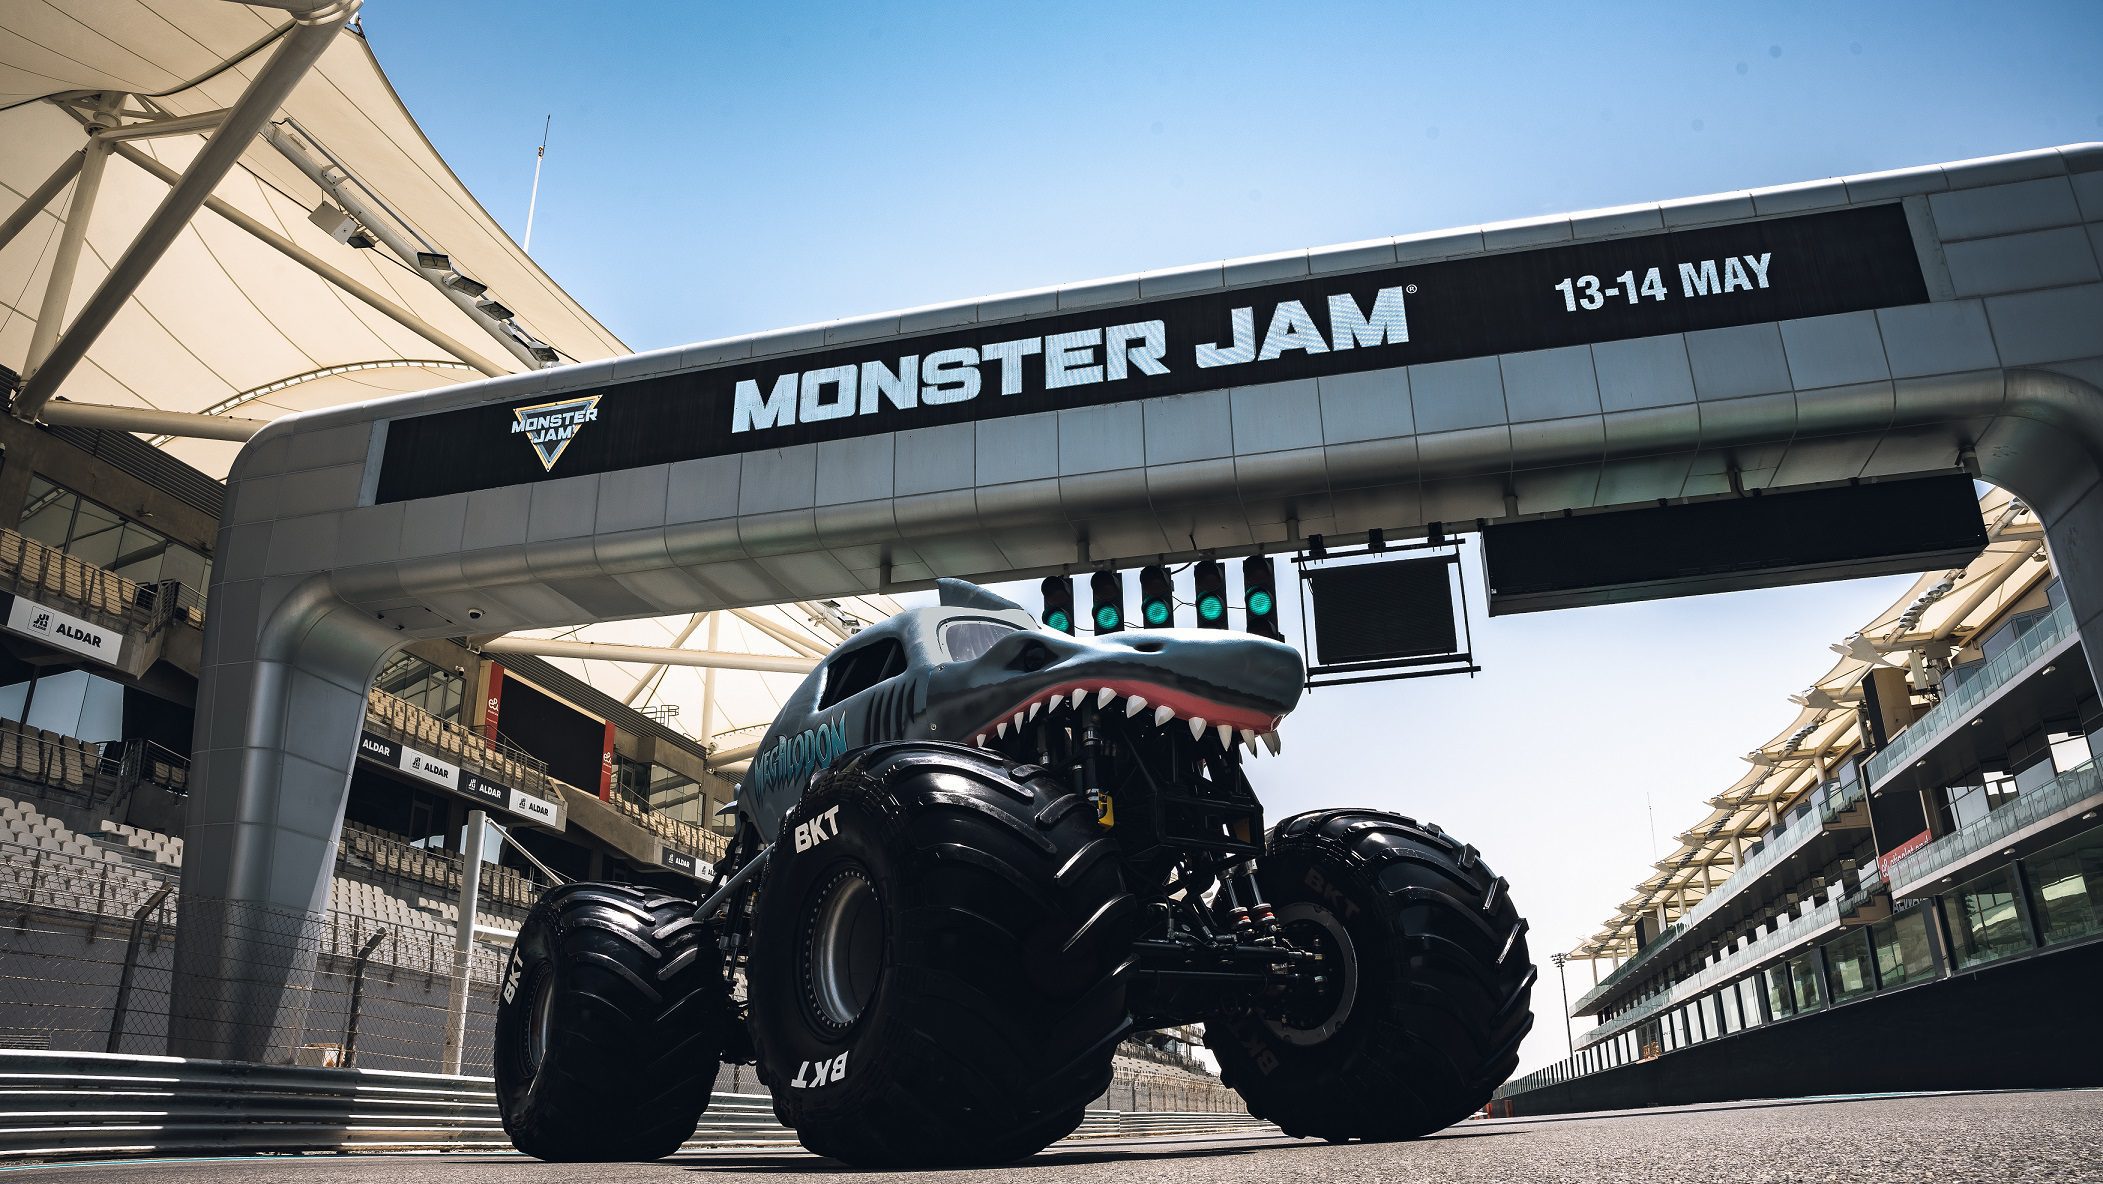 Witness the worlds top monster truck drivers compete inside Etihad Arena this weekend May 13 and 14